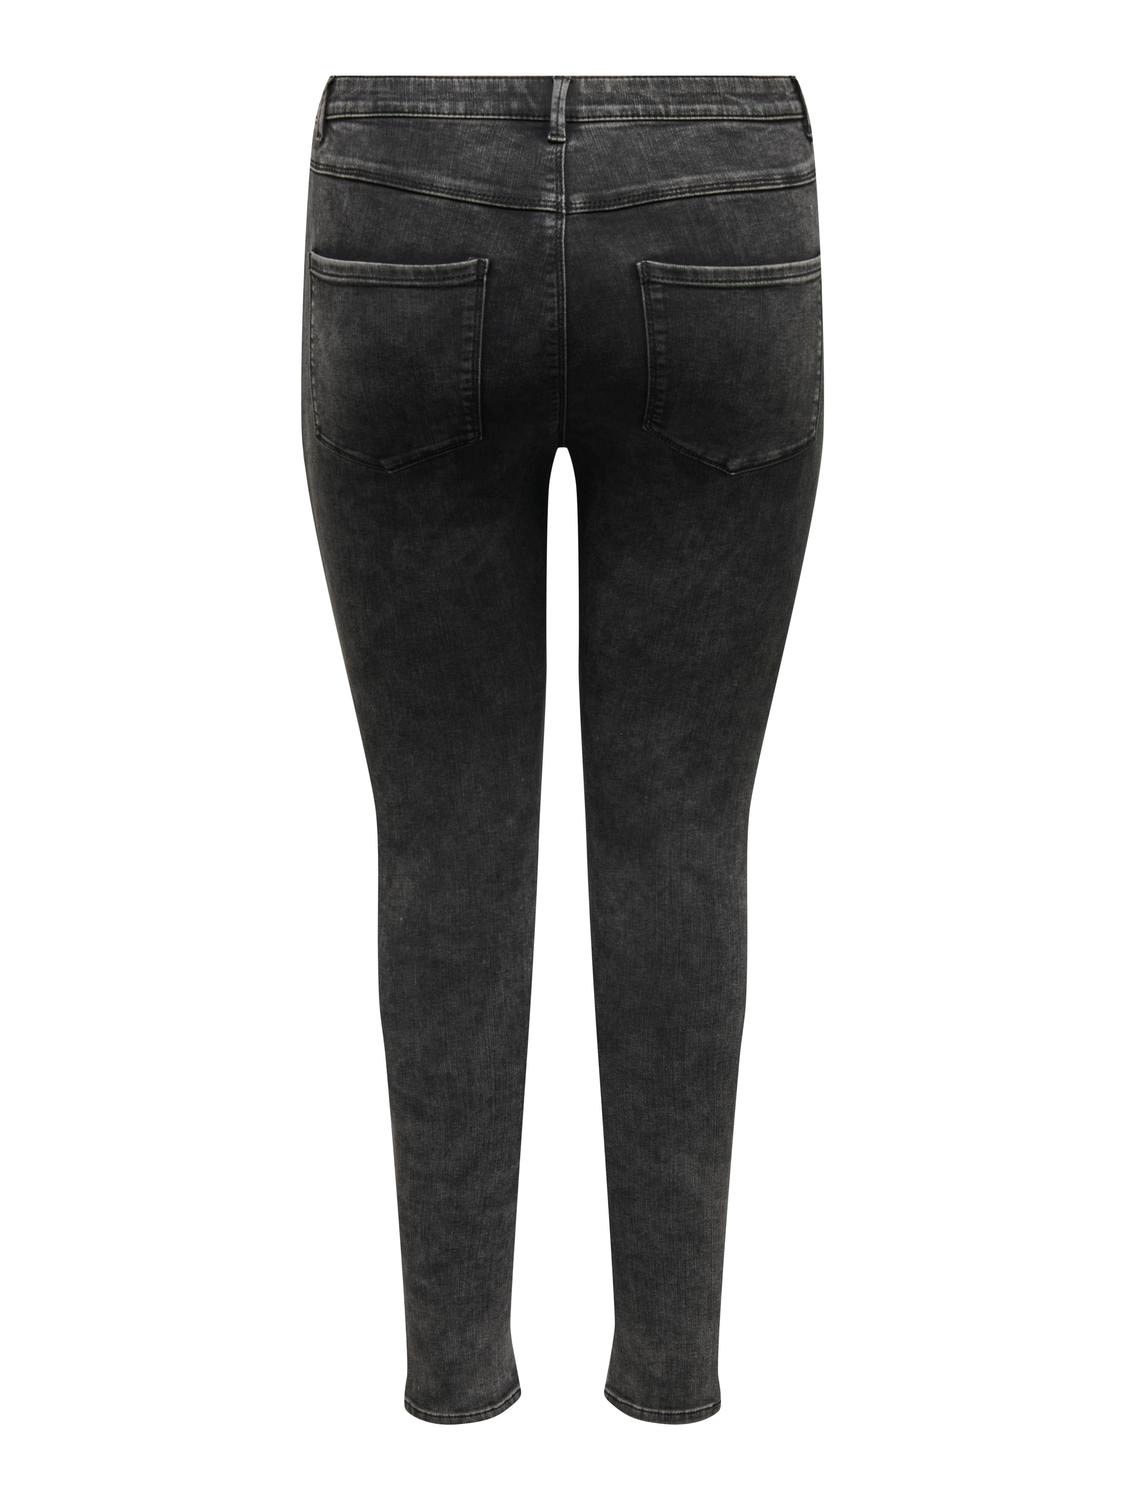 ONLY Skinny Fit Hohe Taille Jeans -Dark Grey Denim - 15300142